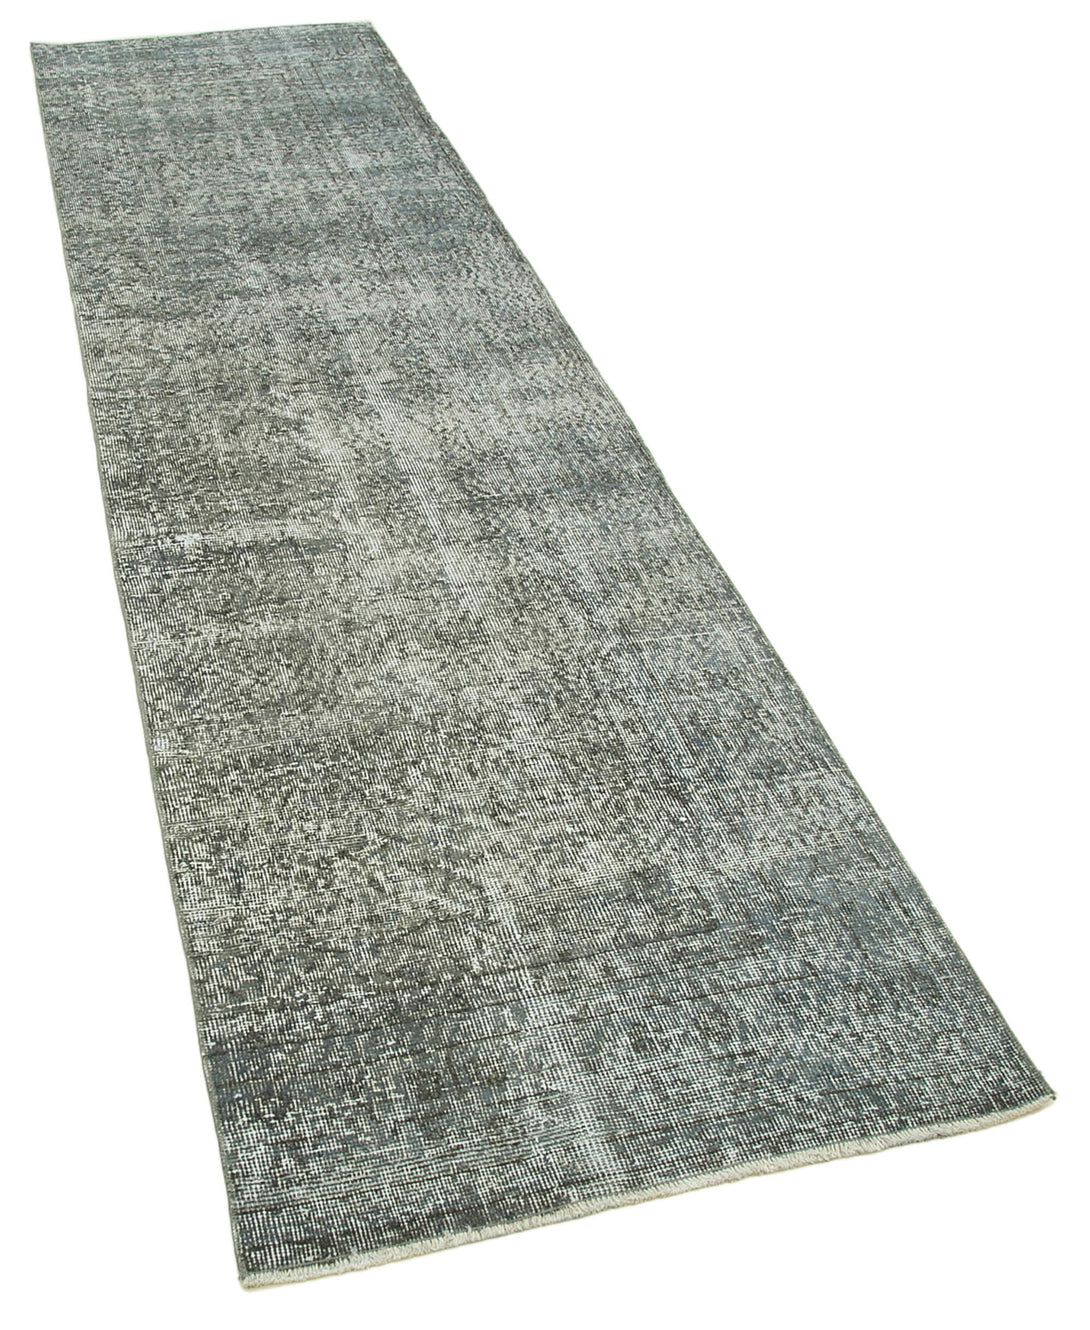 Handmade Overdyed Runner > Design# OL-AC-37077 > Size: 2'-8" x 10'-2", Carpet Culture Rugs, Handmade Rugs, NYC Rugs, New Rugs, Shop Rugs, Rug Store, Outlet Rugs, SoHo Rugs, Rugs in USA